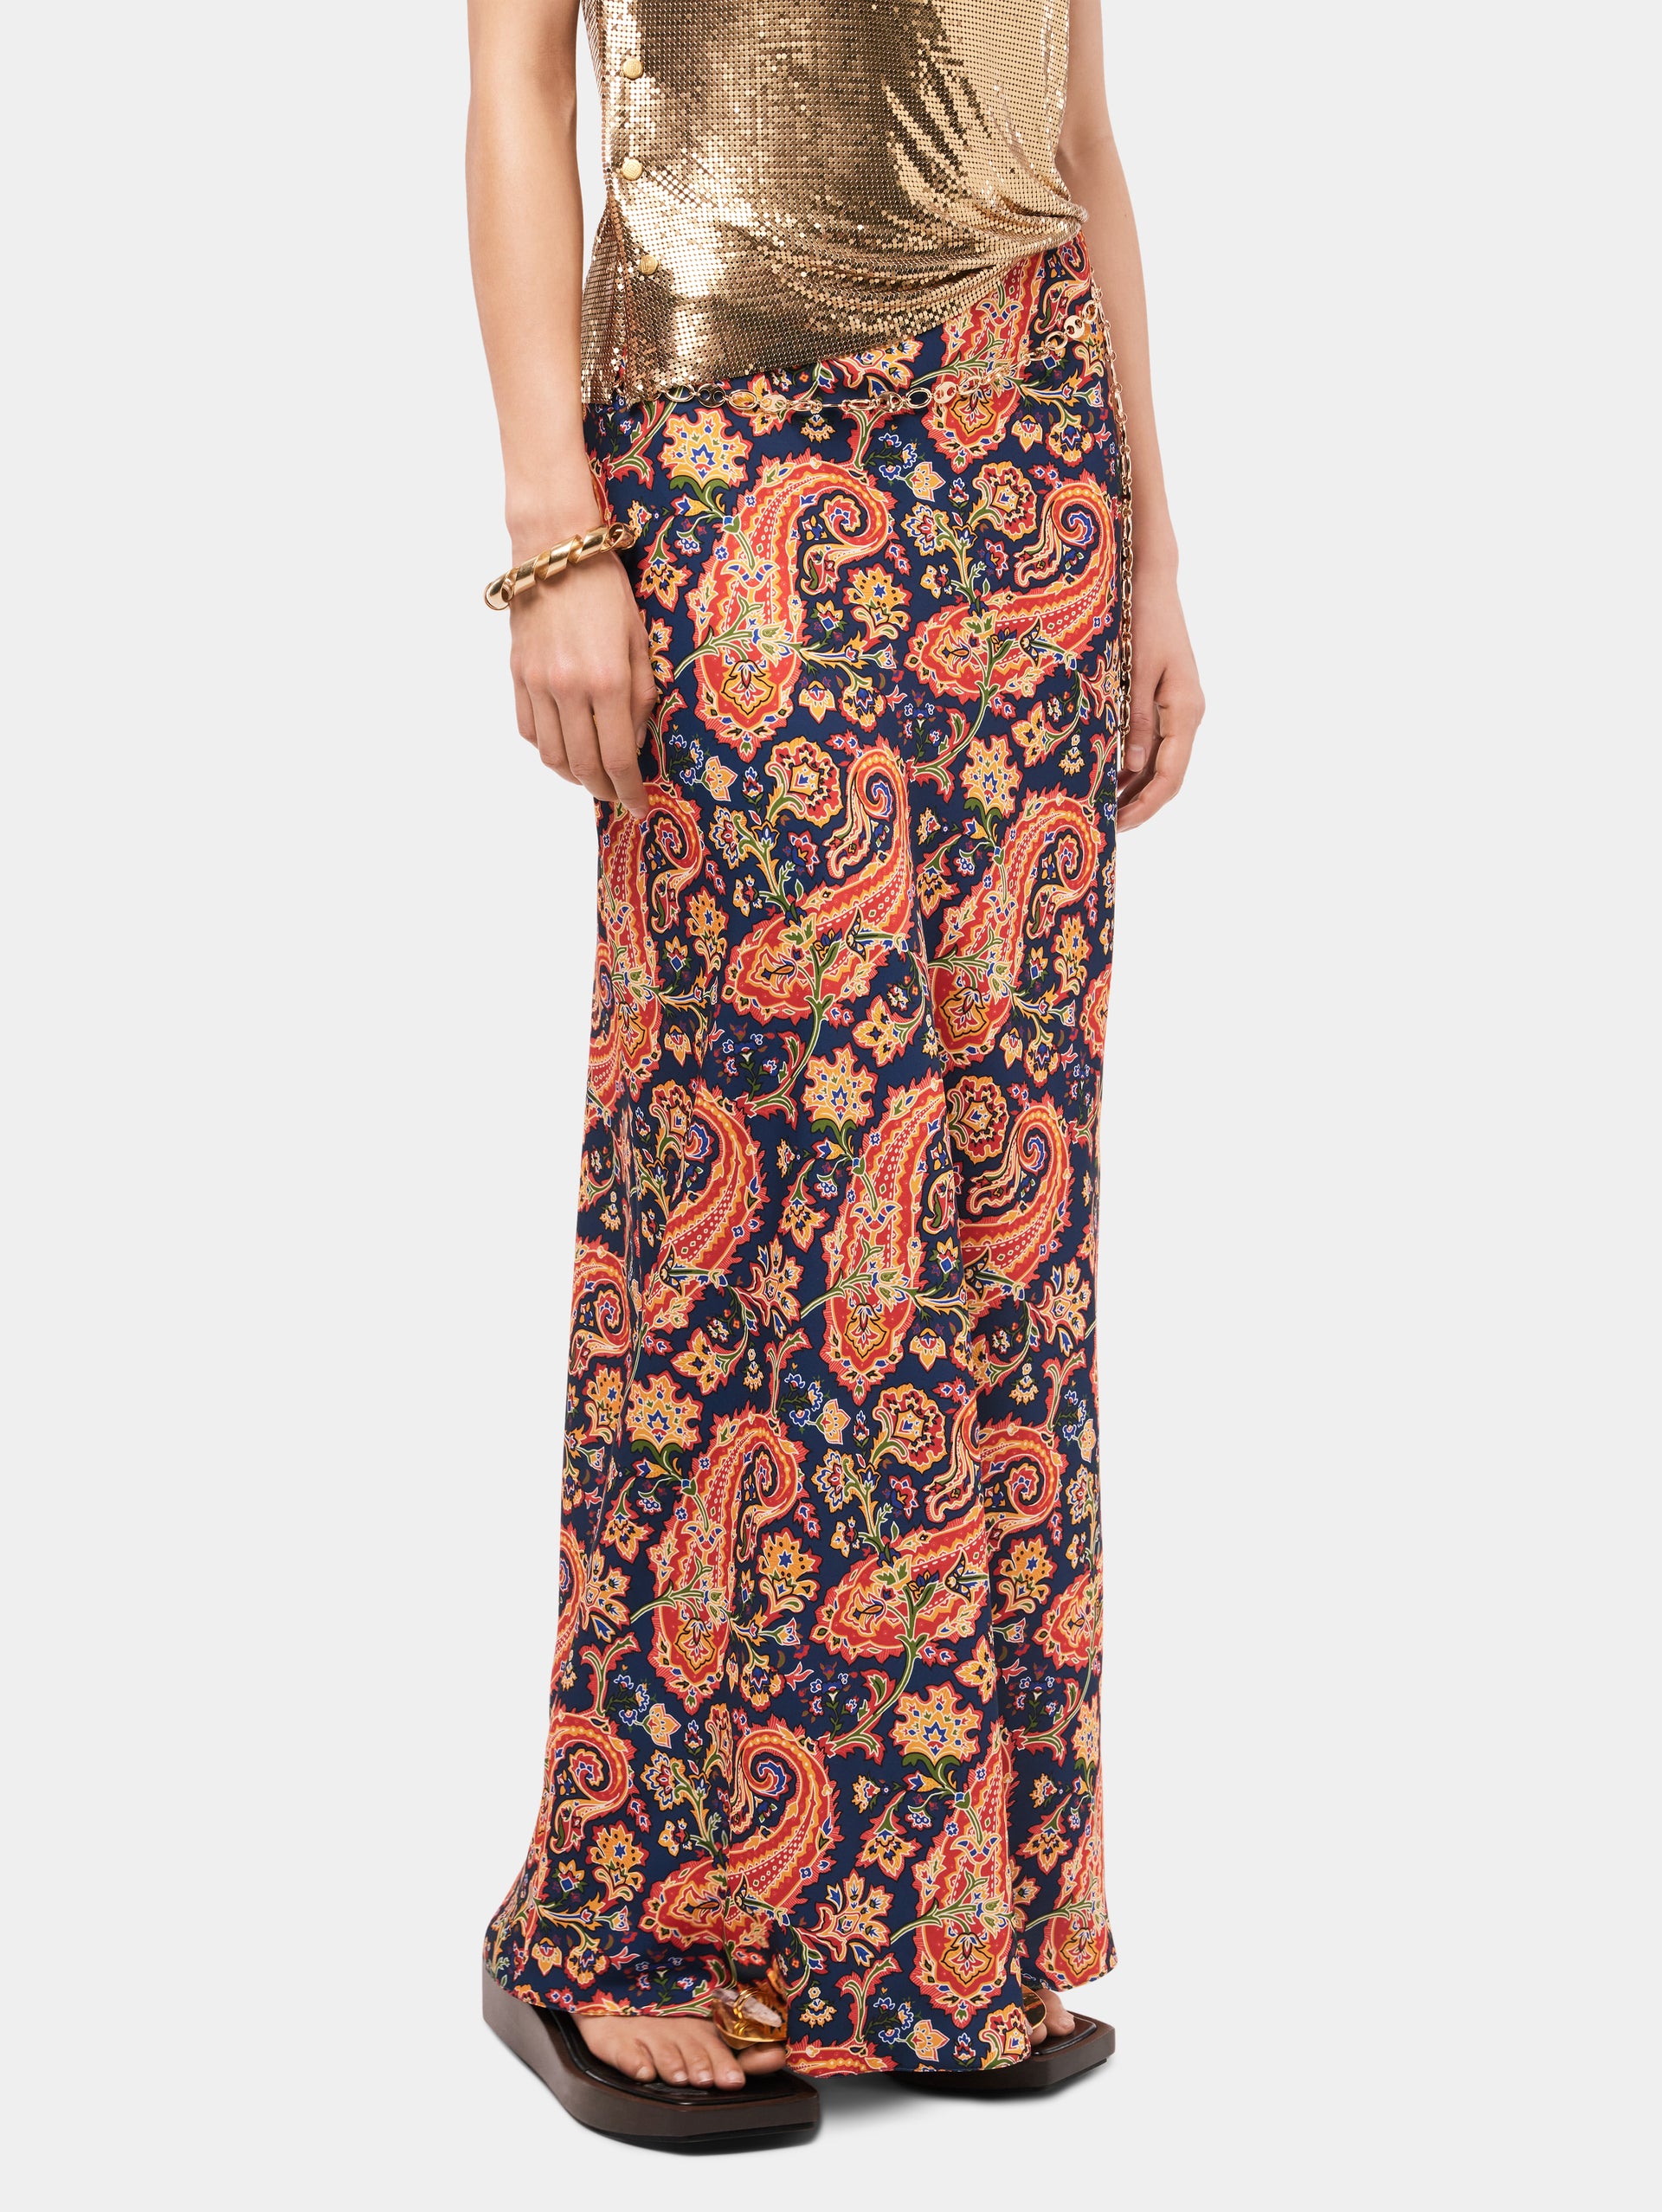 Paisley nuisette skirt with signature eight chain